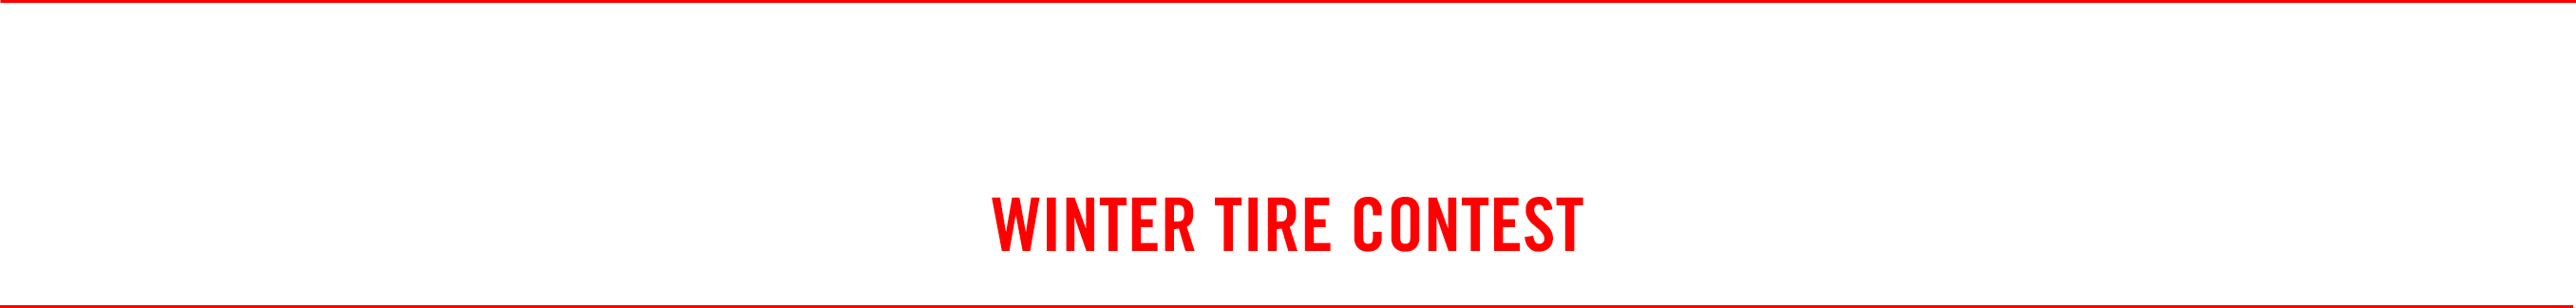 COOL DOWN WITH CERTIFIED SERVICE